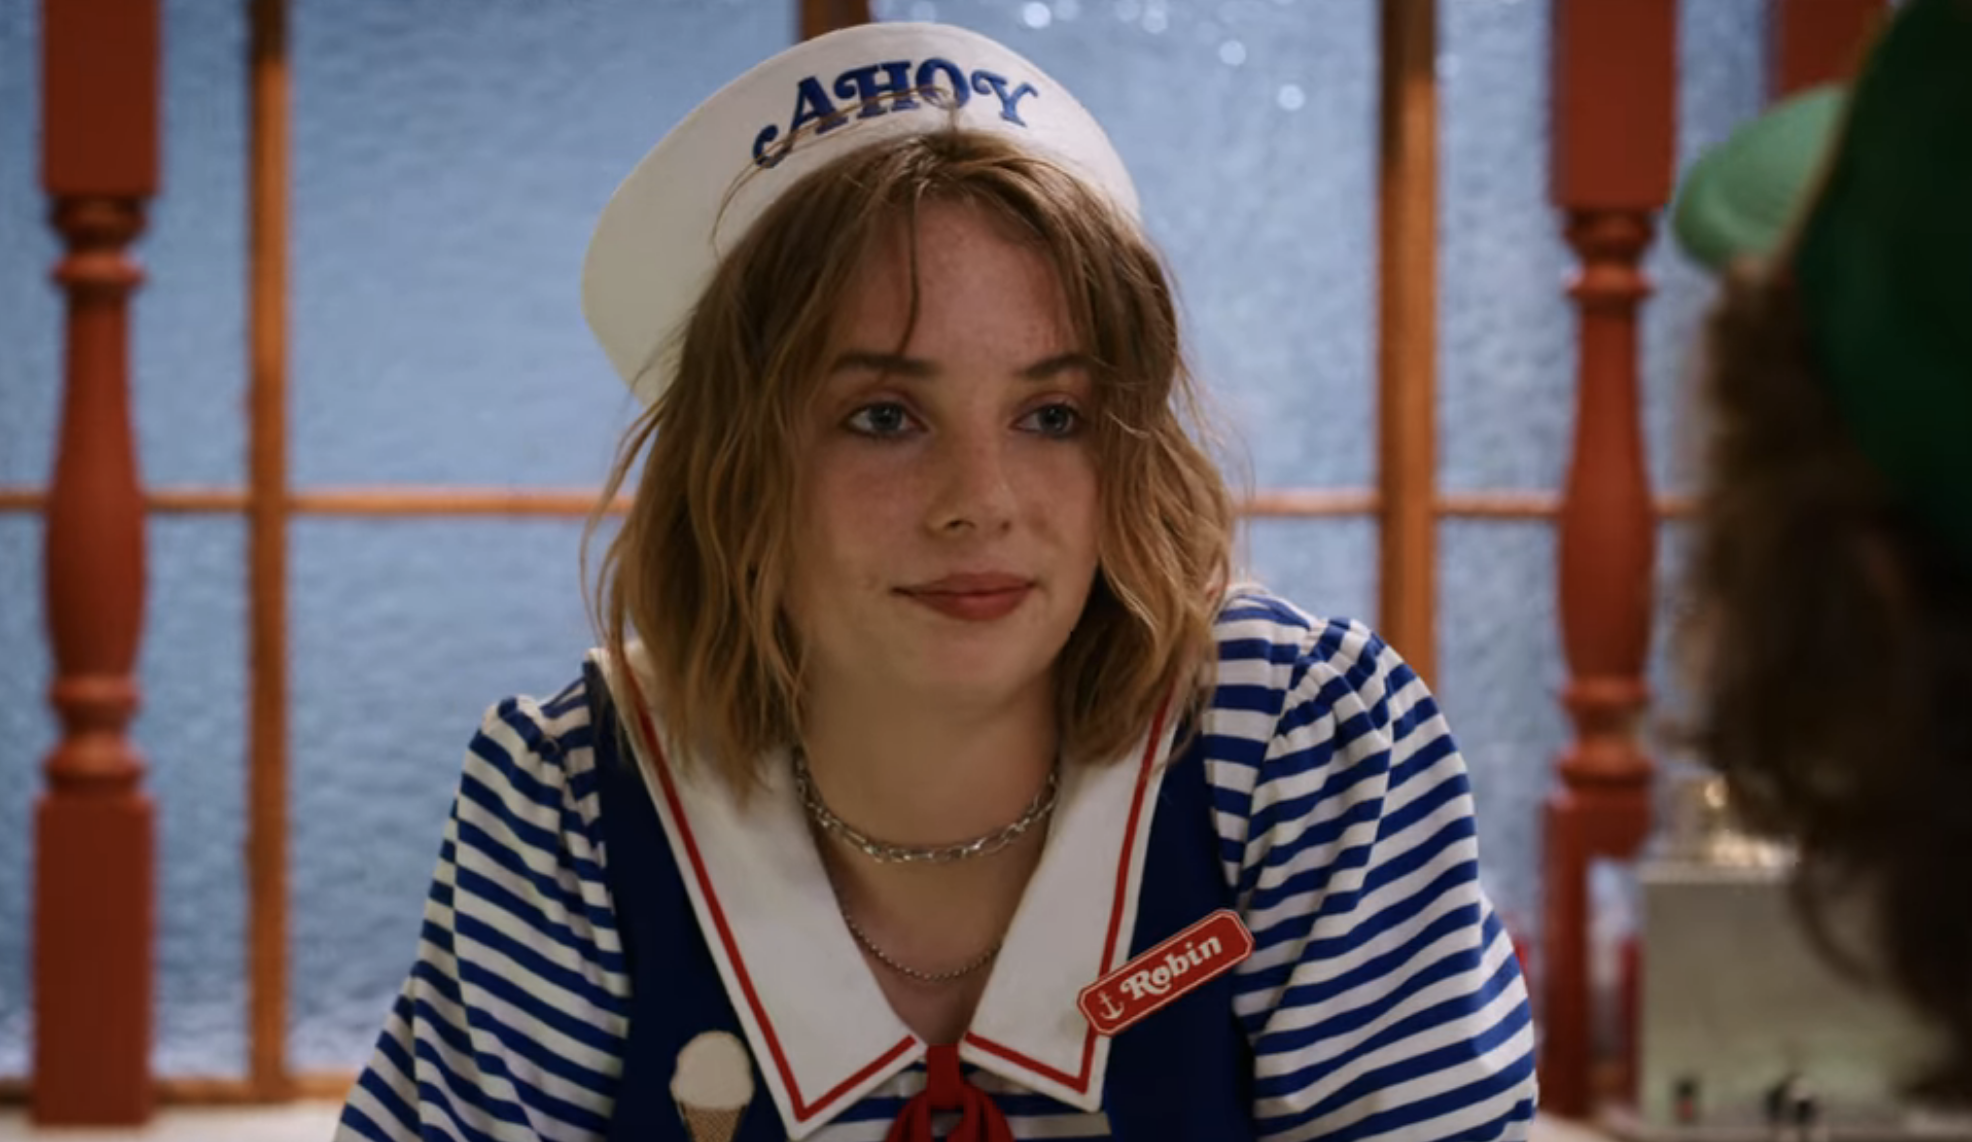 Robin smiles a tight-lipped smile in her Scoops Ahoy uniform